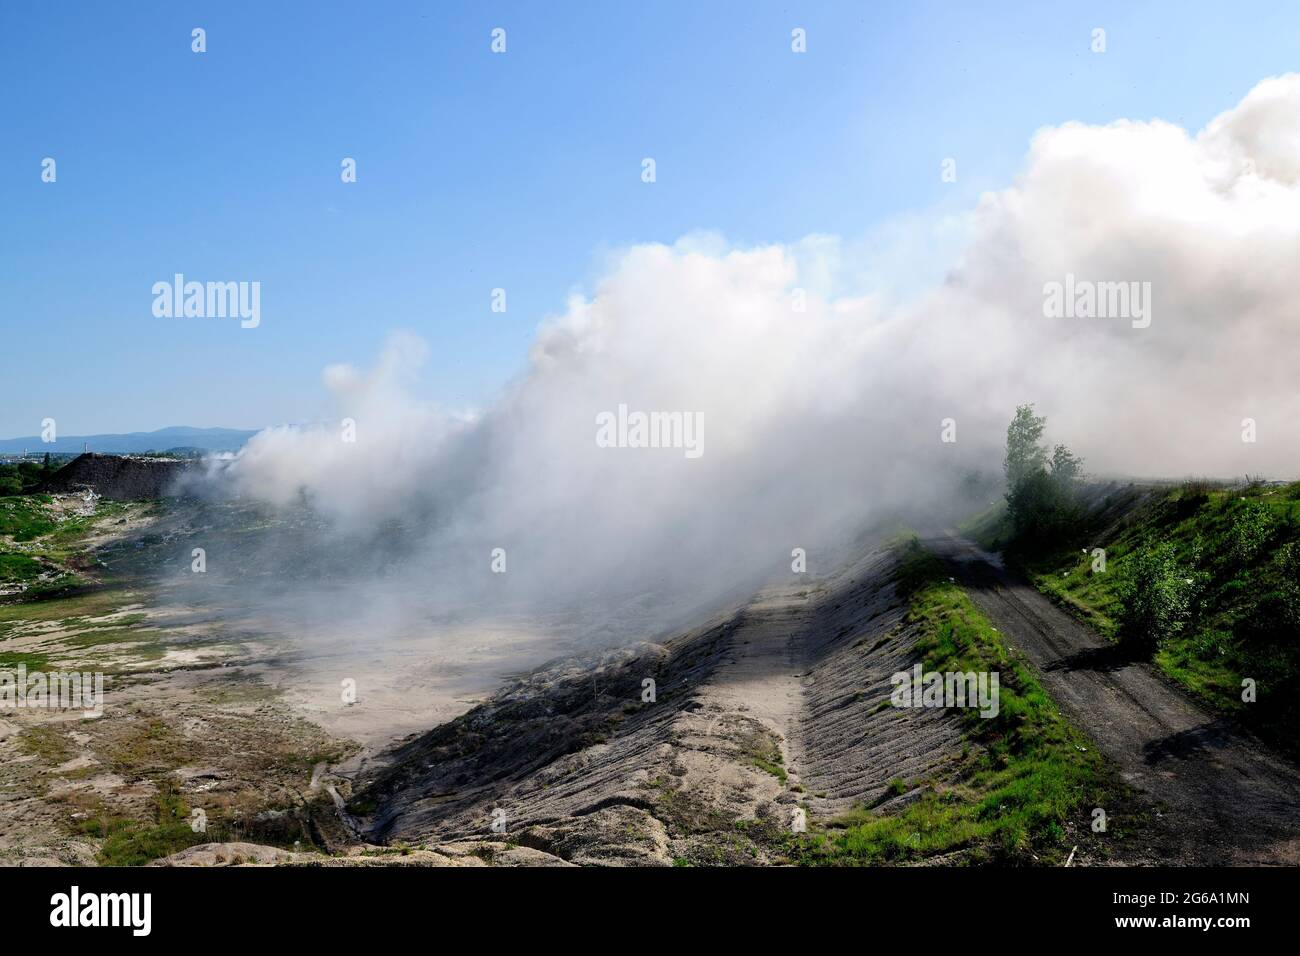 befoul, black, blue, catastrophe, clouds, contamination, defilement, dirtying, eco, environment, fire, fulvous, gassing, impurity, pollute, pollution, Stock Photo